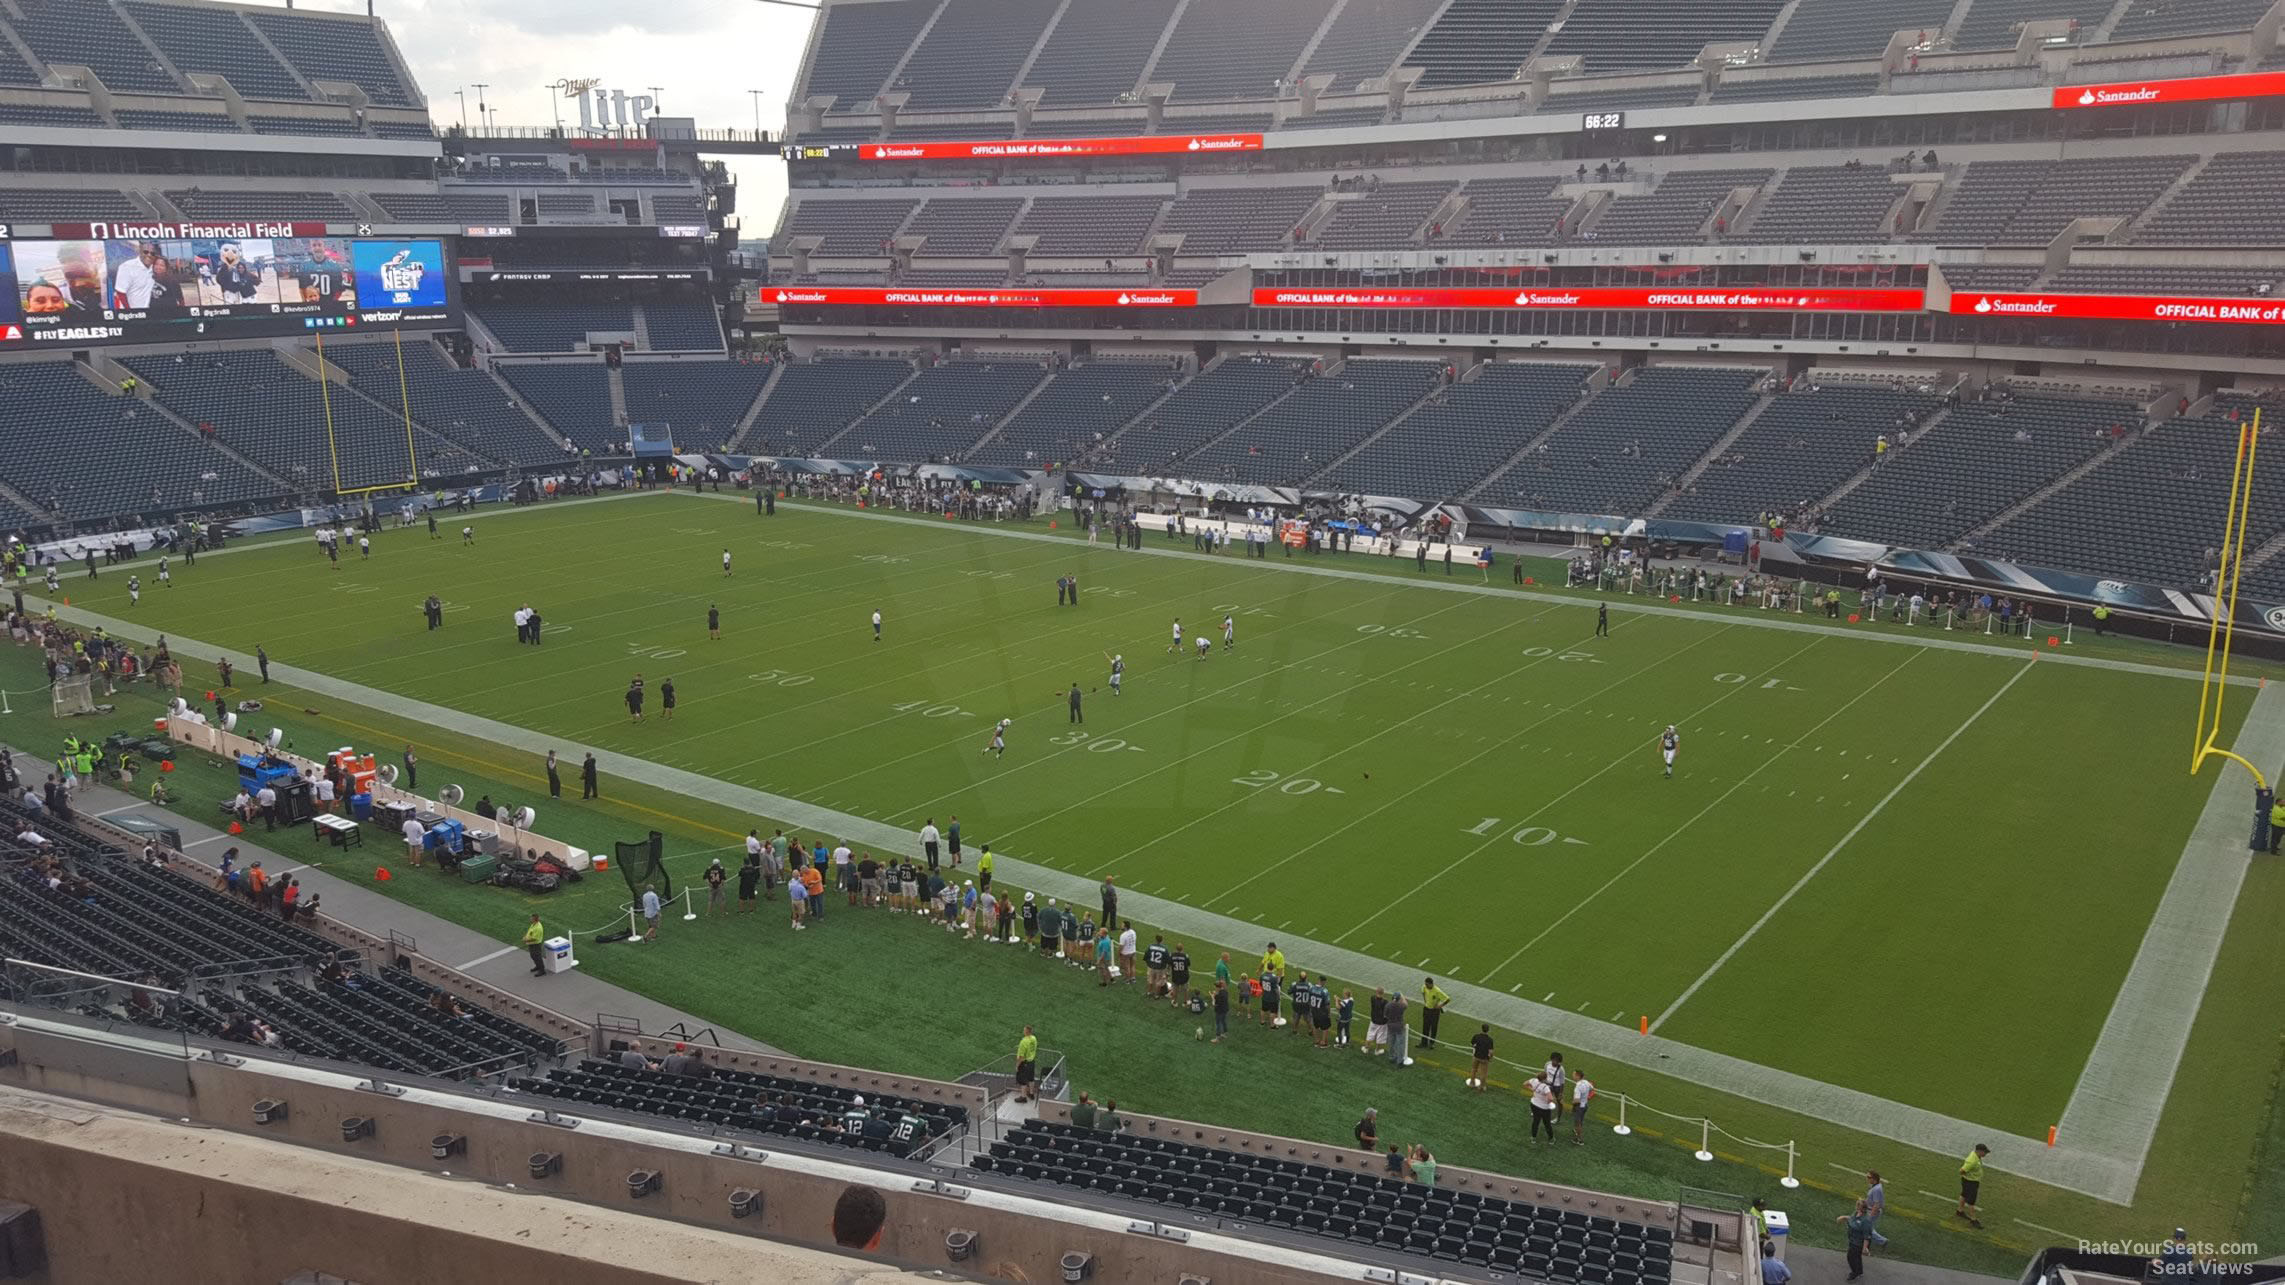 section c26, row 7 seat view  for football - lincoln financial field